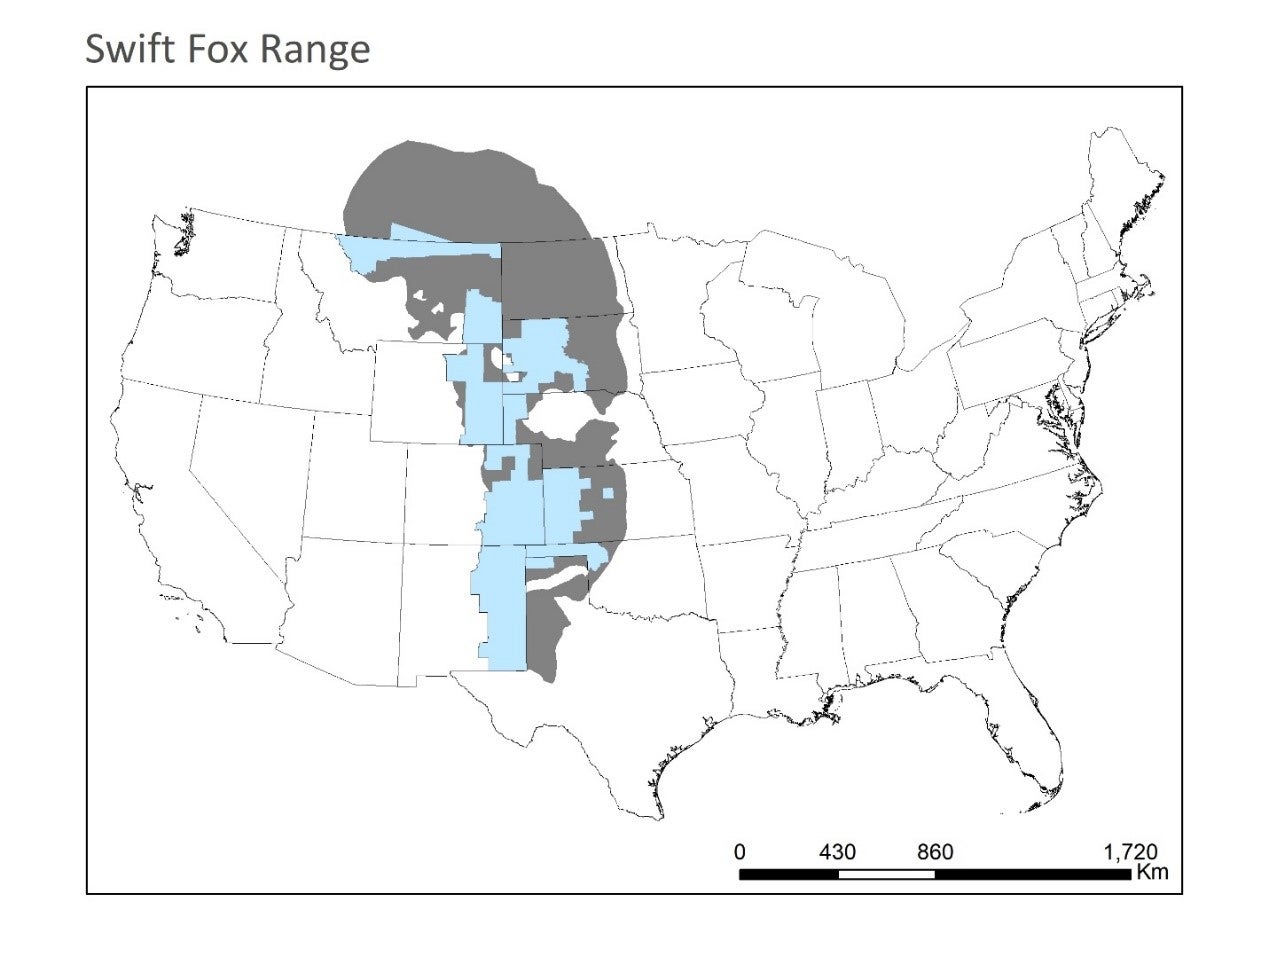 A map of the swift fox's range in North America based on IUCN records. It shows the historic range of the swift fox (gray) compared to its current range (light blue).